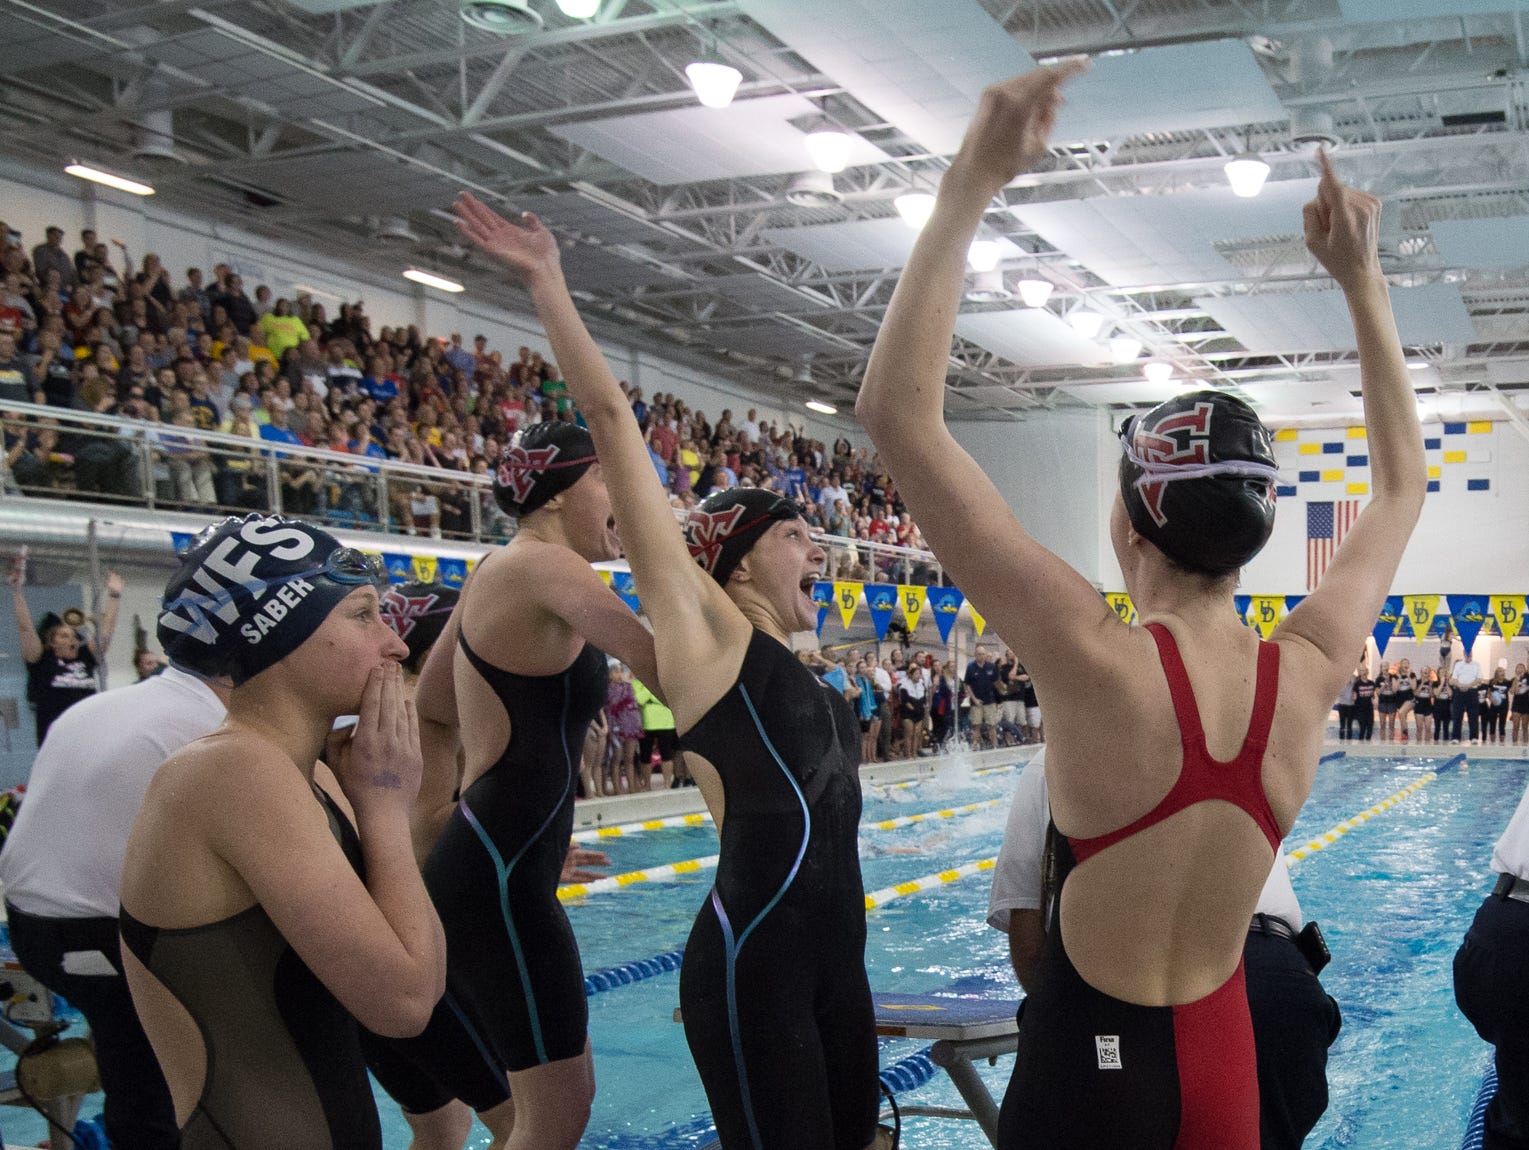 Swimmers from Ursuline Academy celebrate after winning the 200 yard medley relay at the girl's DIAA swimming and diving championships at the University of Delaware.